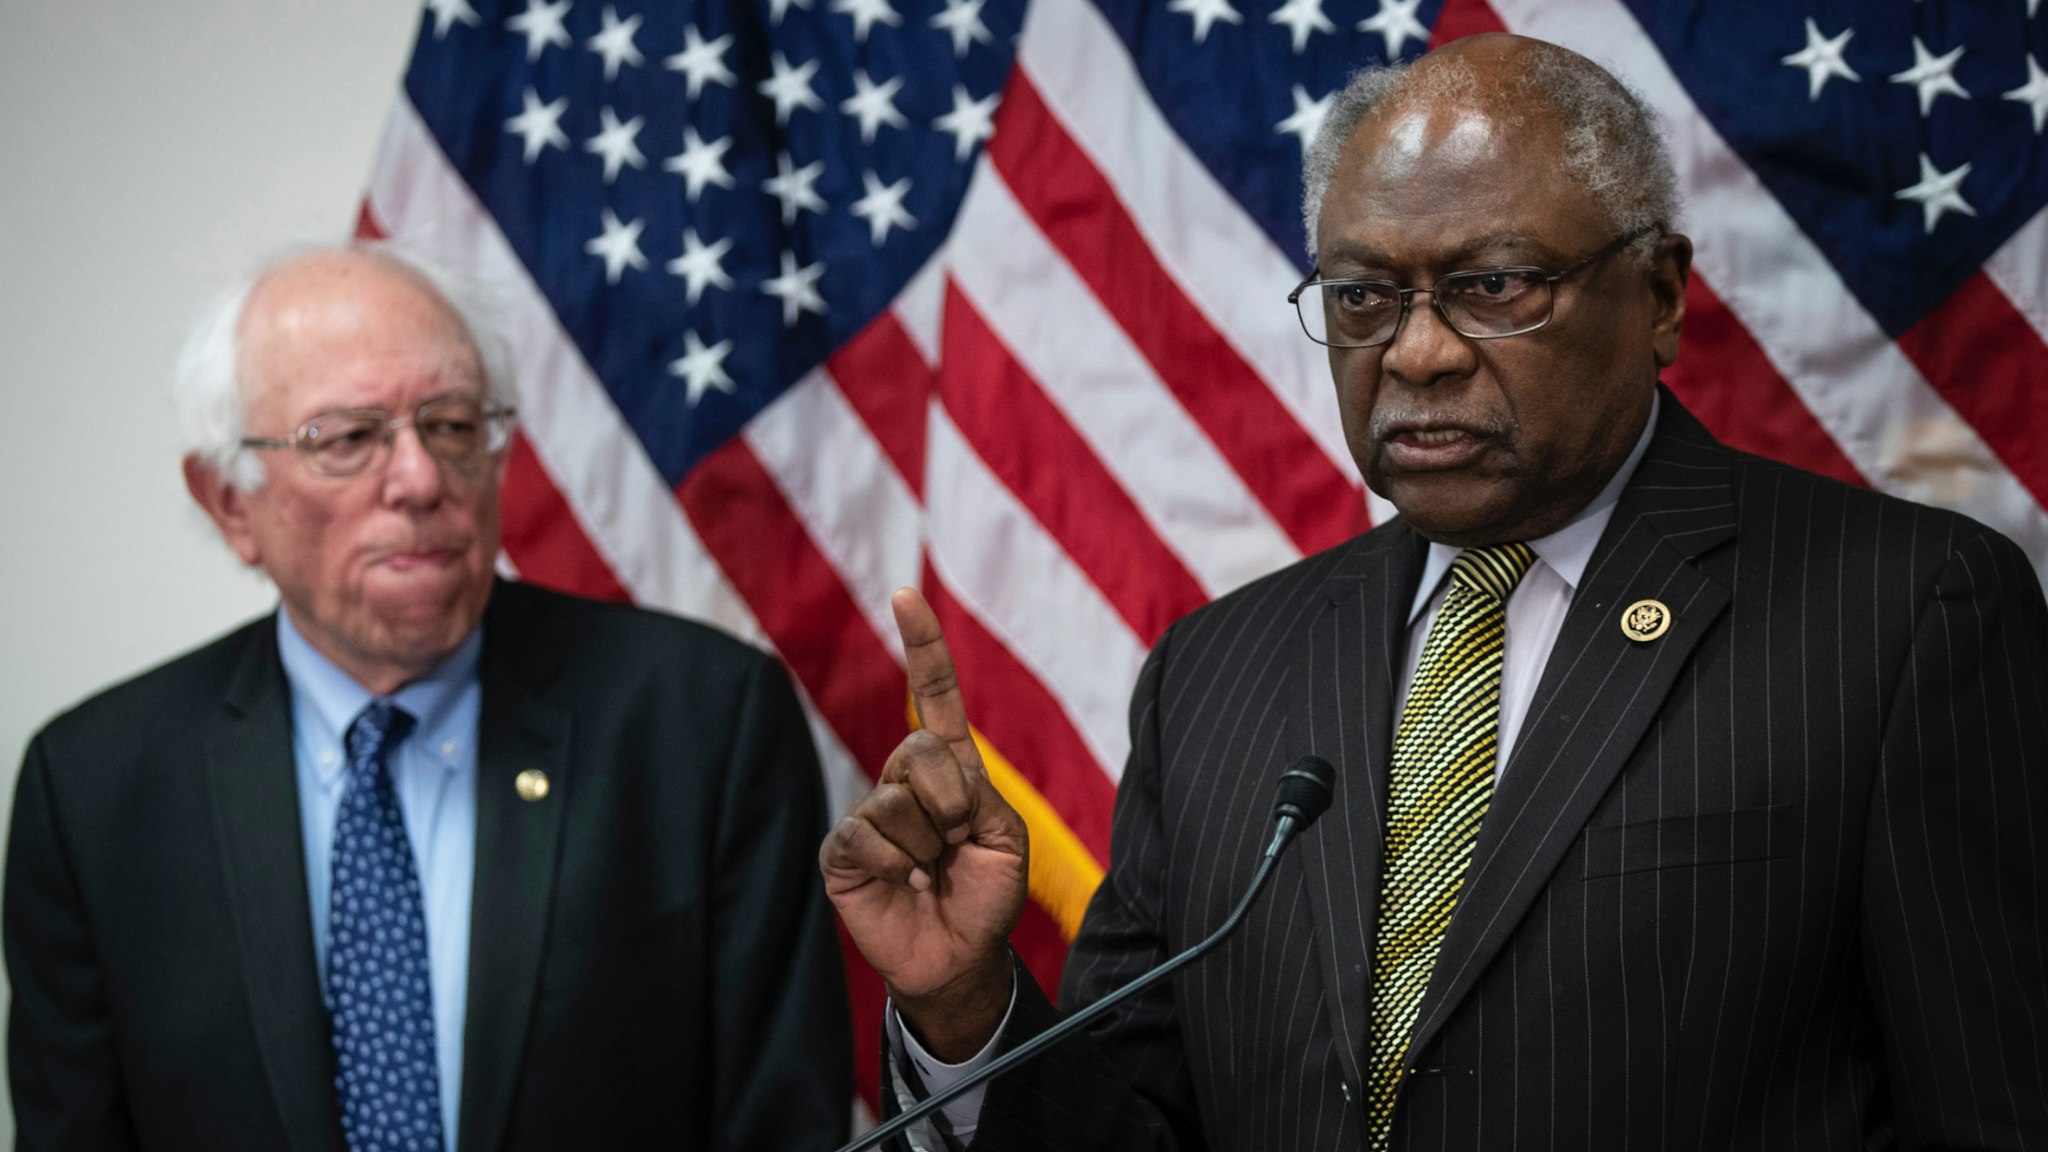 Sen. Bernie Sanders (I-VT) looks on as Rep. James Clyburn (D-SC) speaks during a press conference to announce legislation to extend and expand funding for community health centers and the National Health Service Corps, at the U.S. Capitol on March 28, 2019 in Washington, DC.